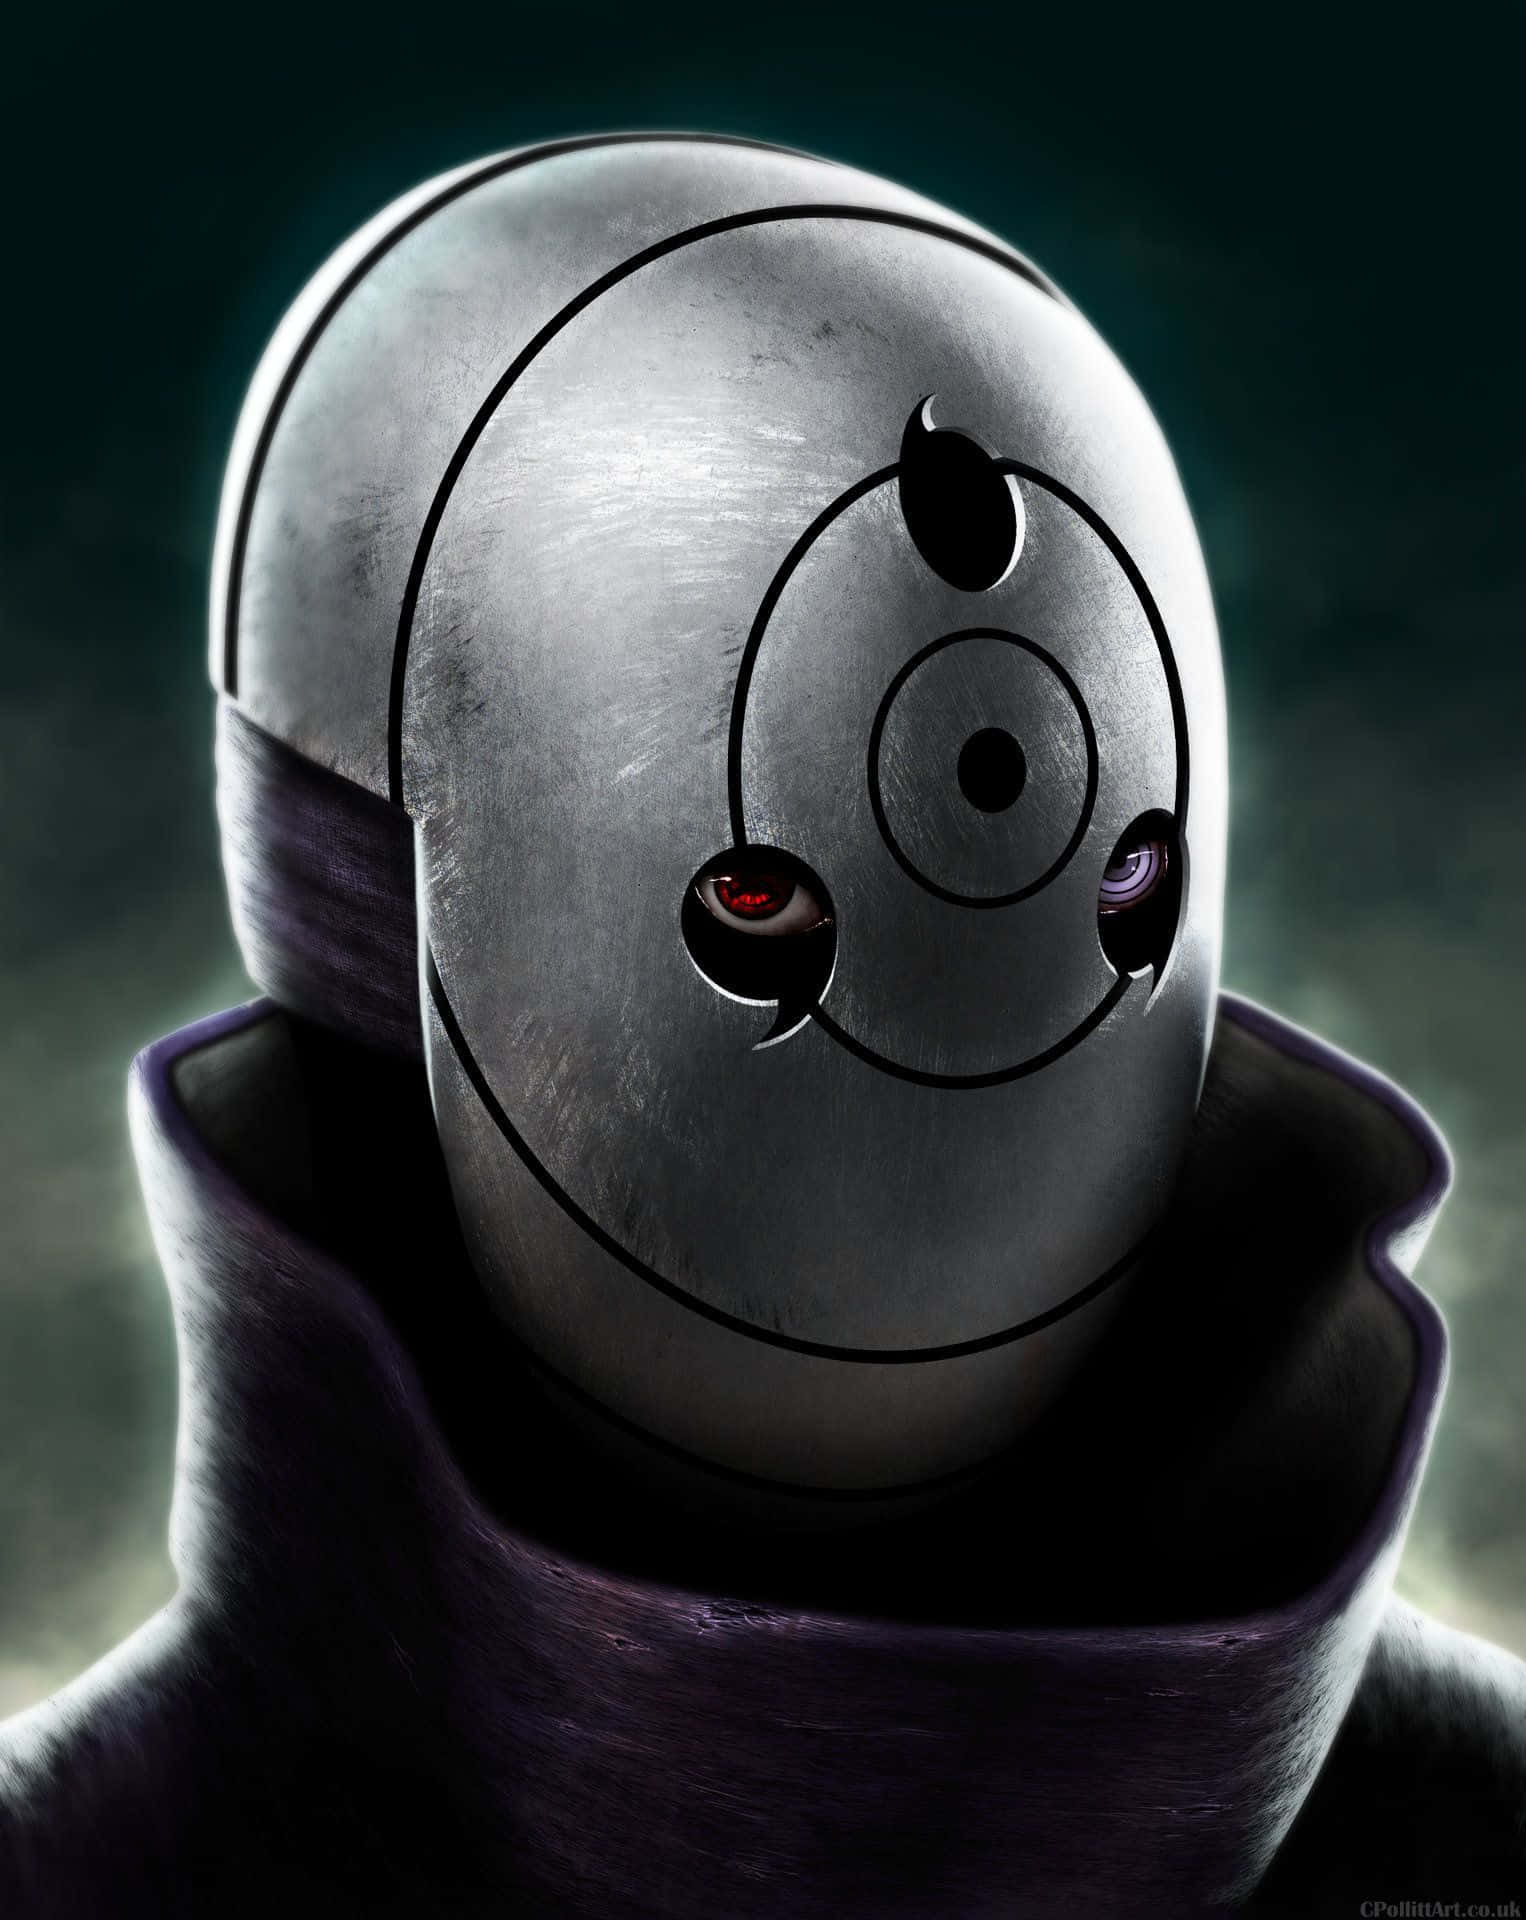 Download A Black And Silver Robot With A Red Eye Wallpaper | Wallpapers.com